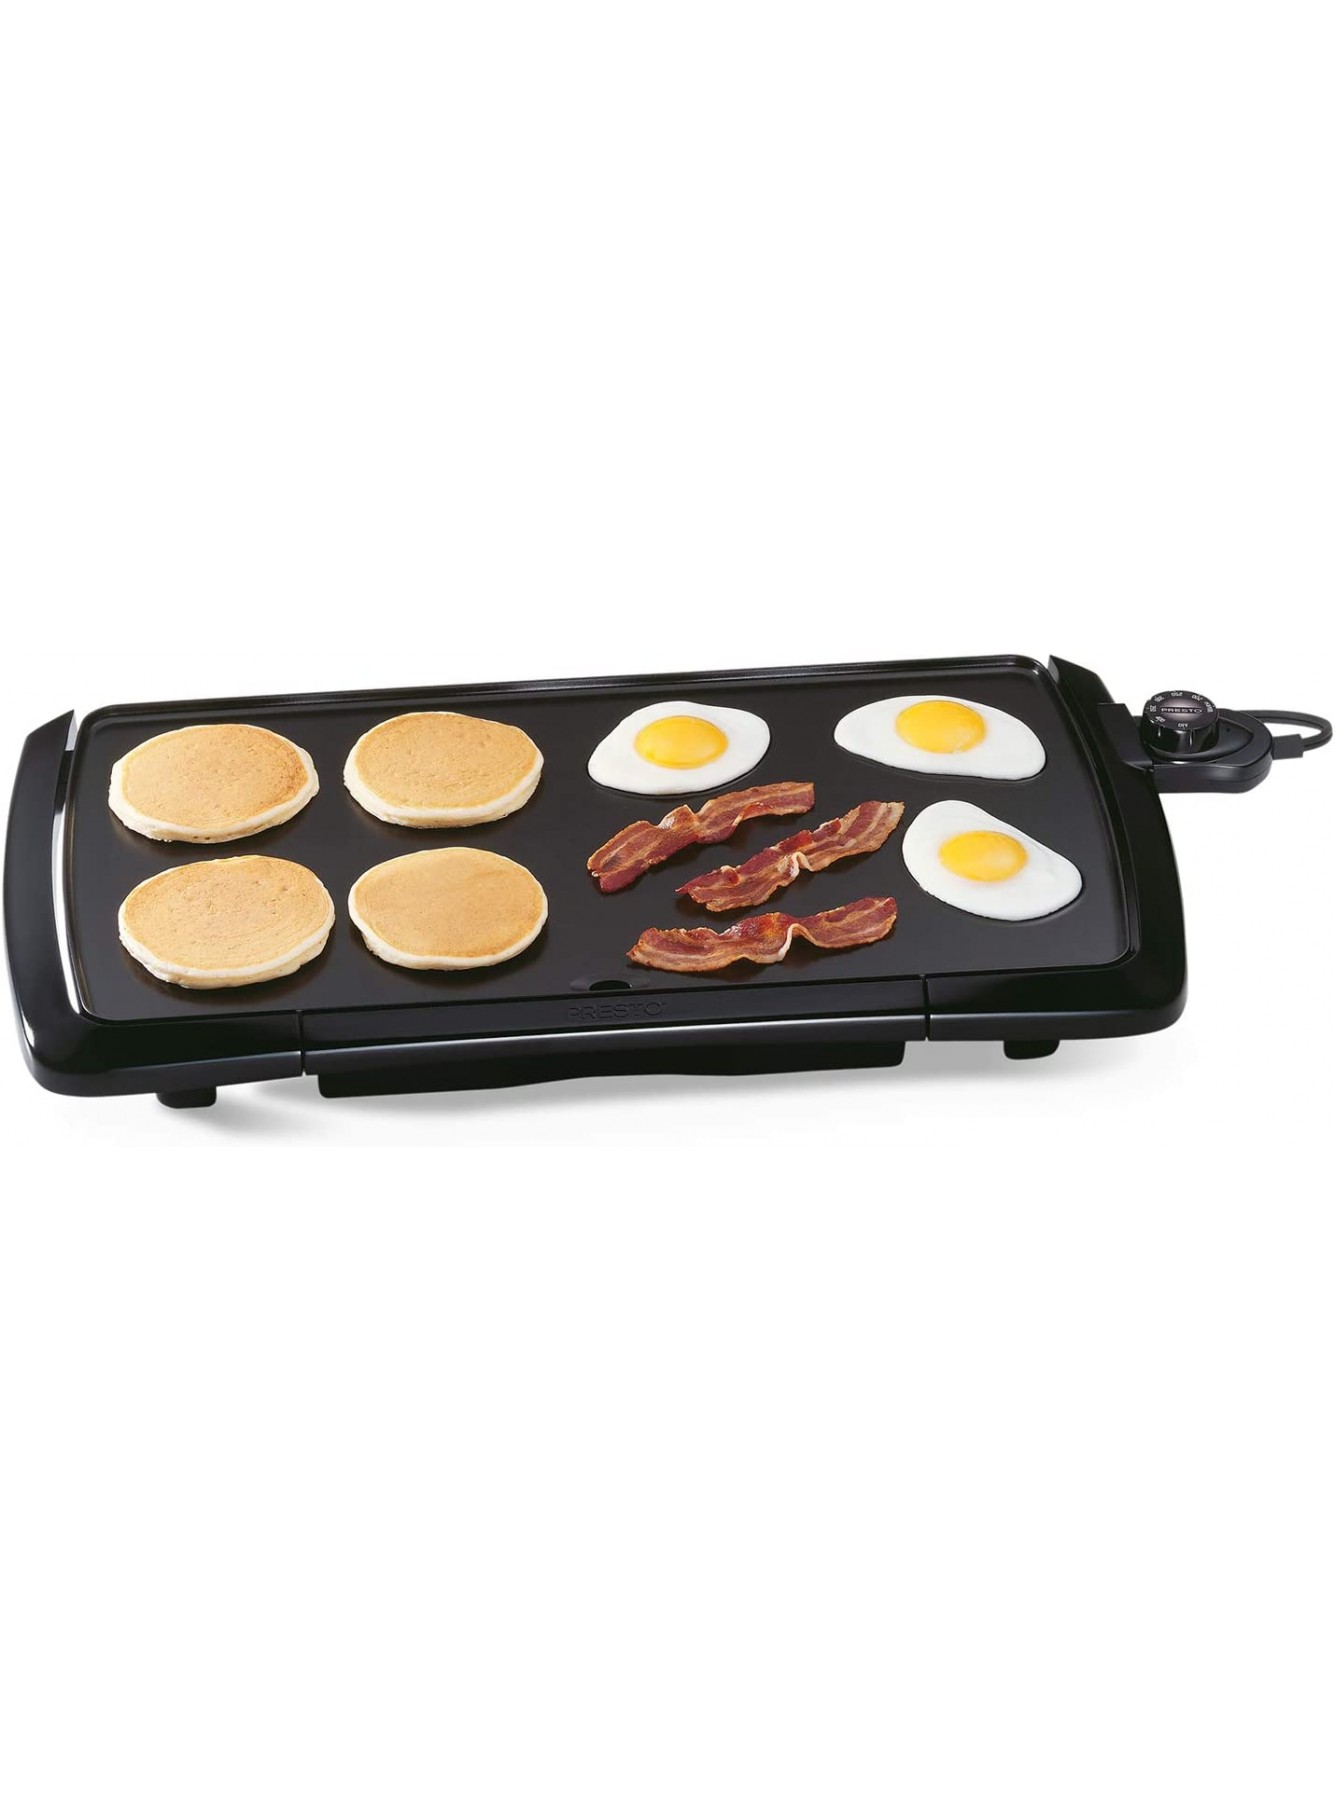 Presto 07030 Cool Touch Electric Griddle B001078UCC